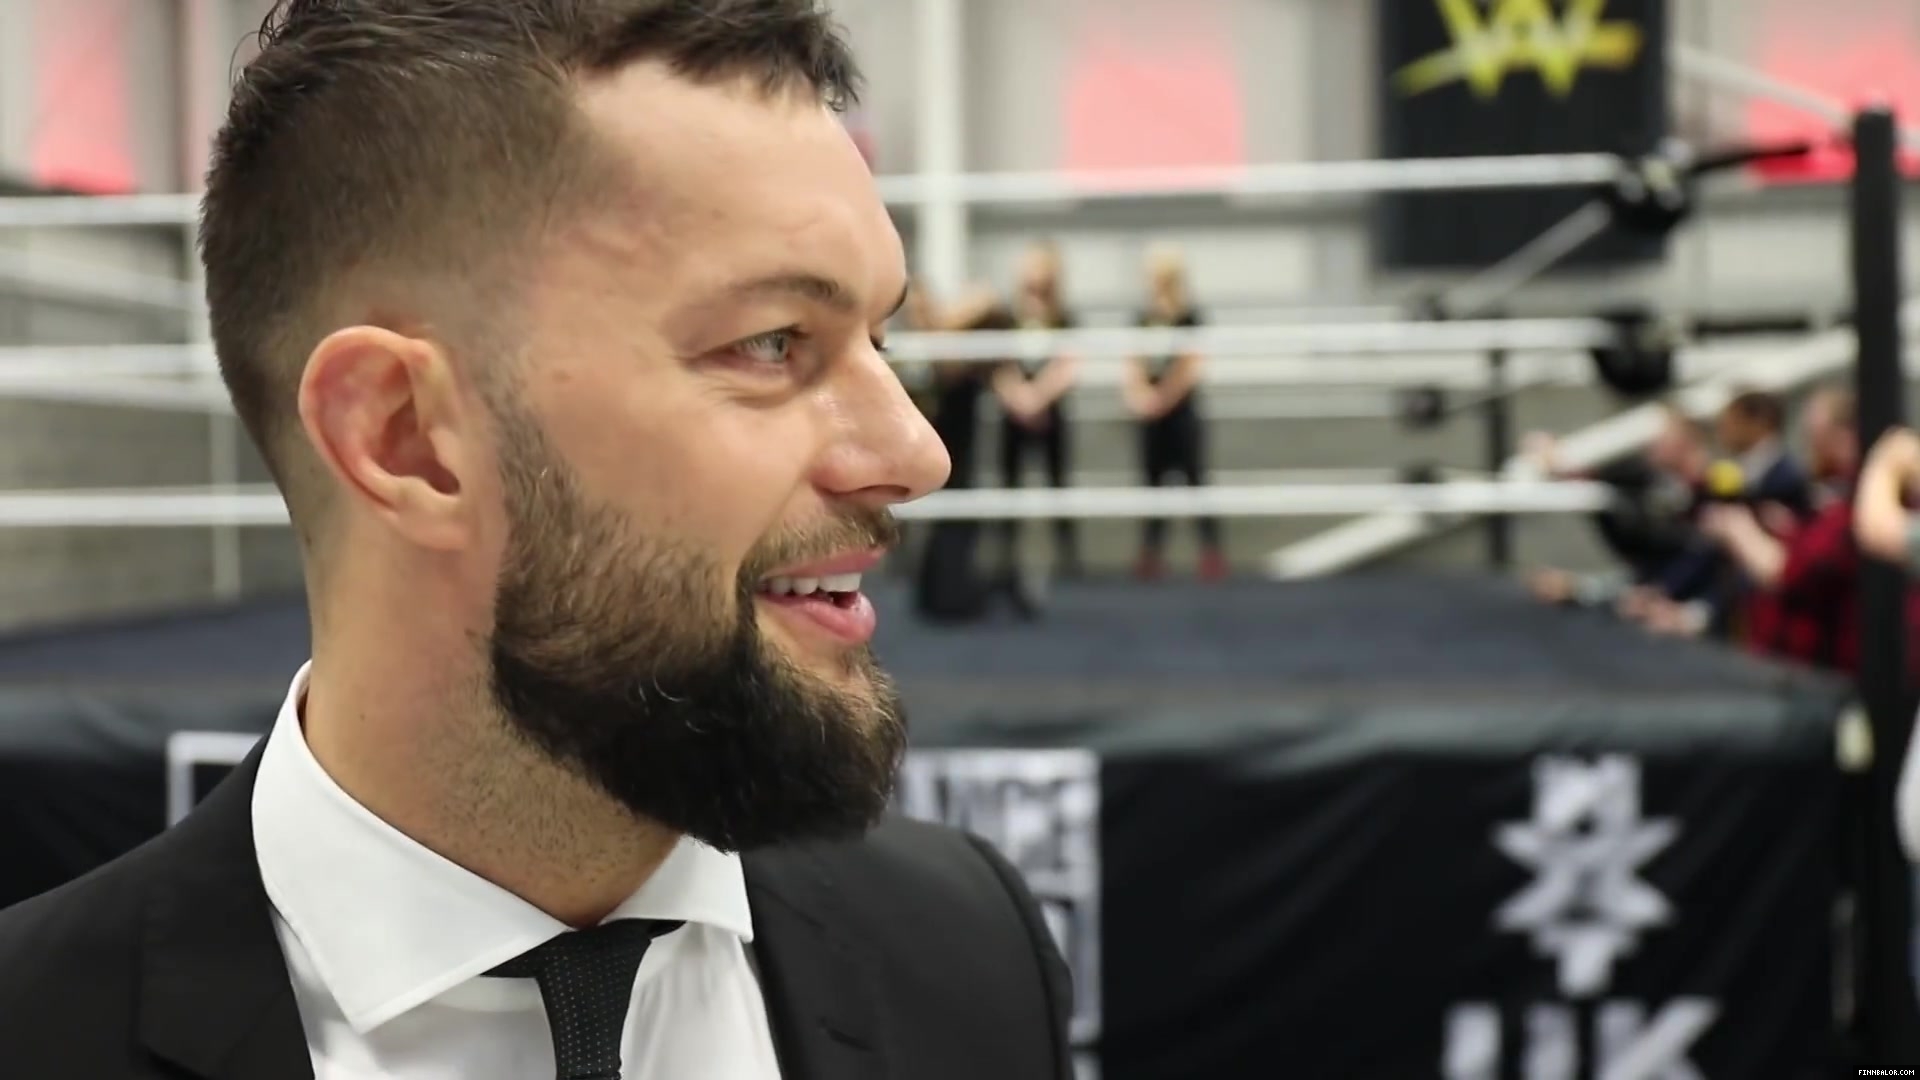 WWE_Superstar_FINN_BALOR_joins_MOUSTACHE_MOUNTAIN_at_the_opening_of_the_NXT_UK_PC_073.jpg